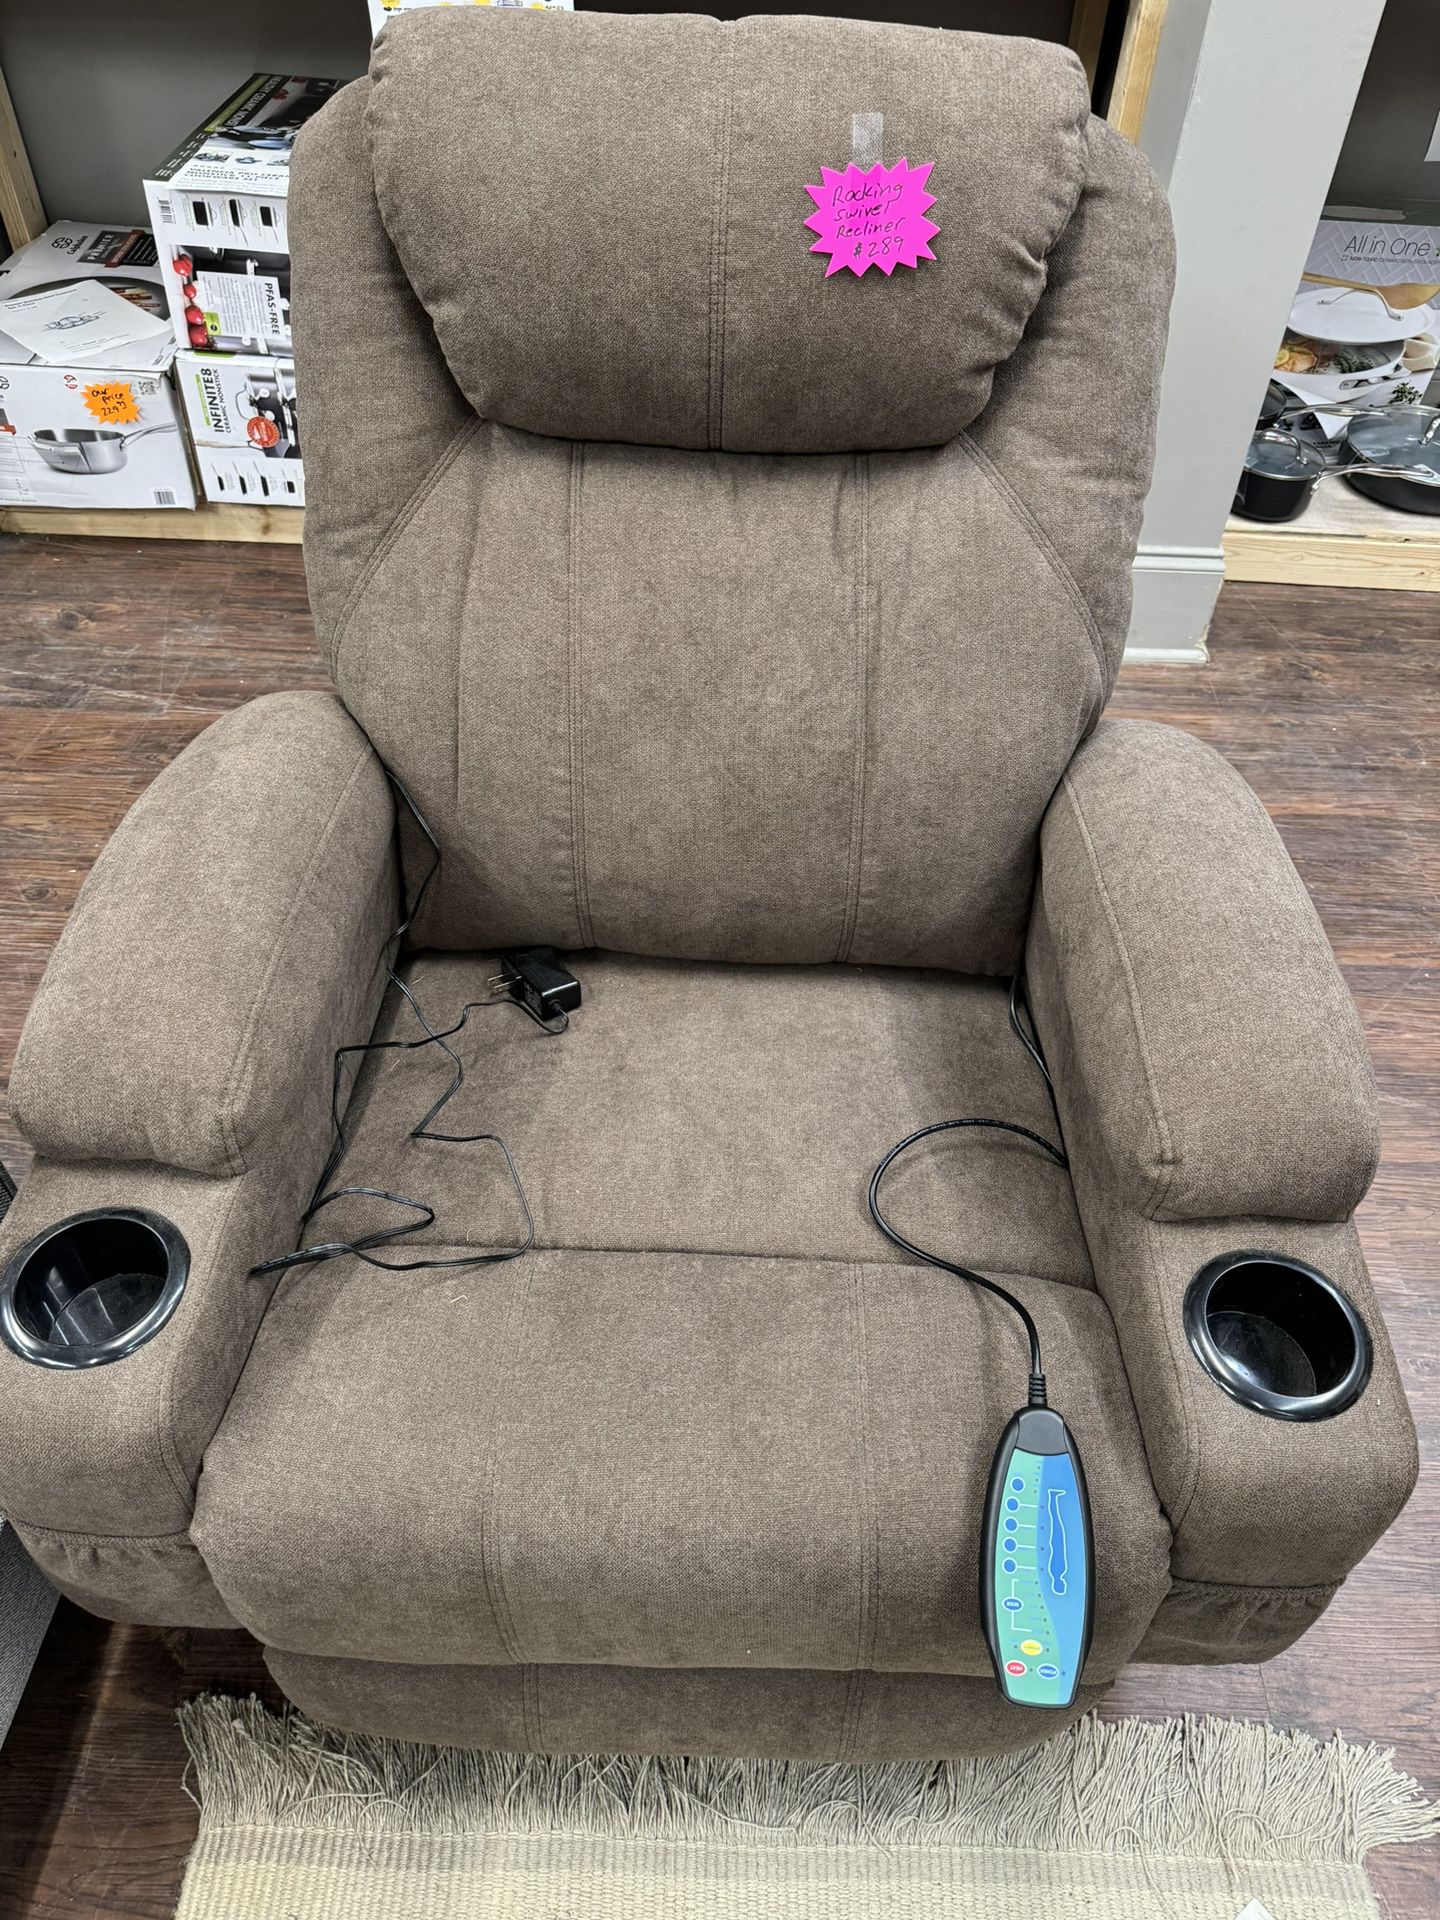 New Rocker Swivel Recliner Chair With Heat And Massage 